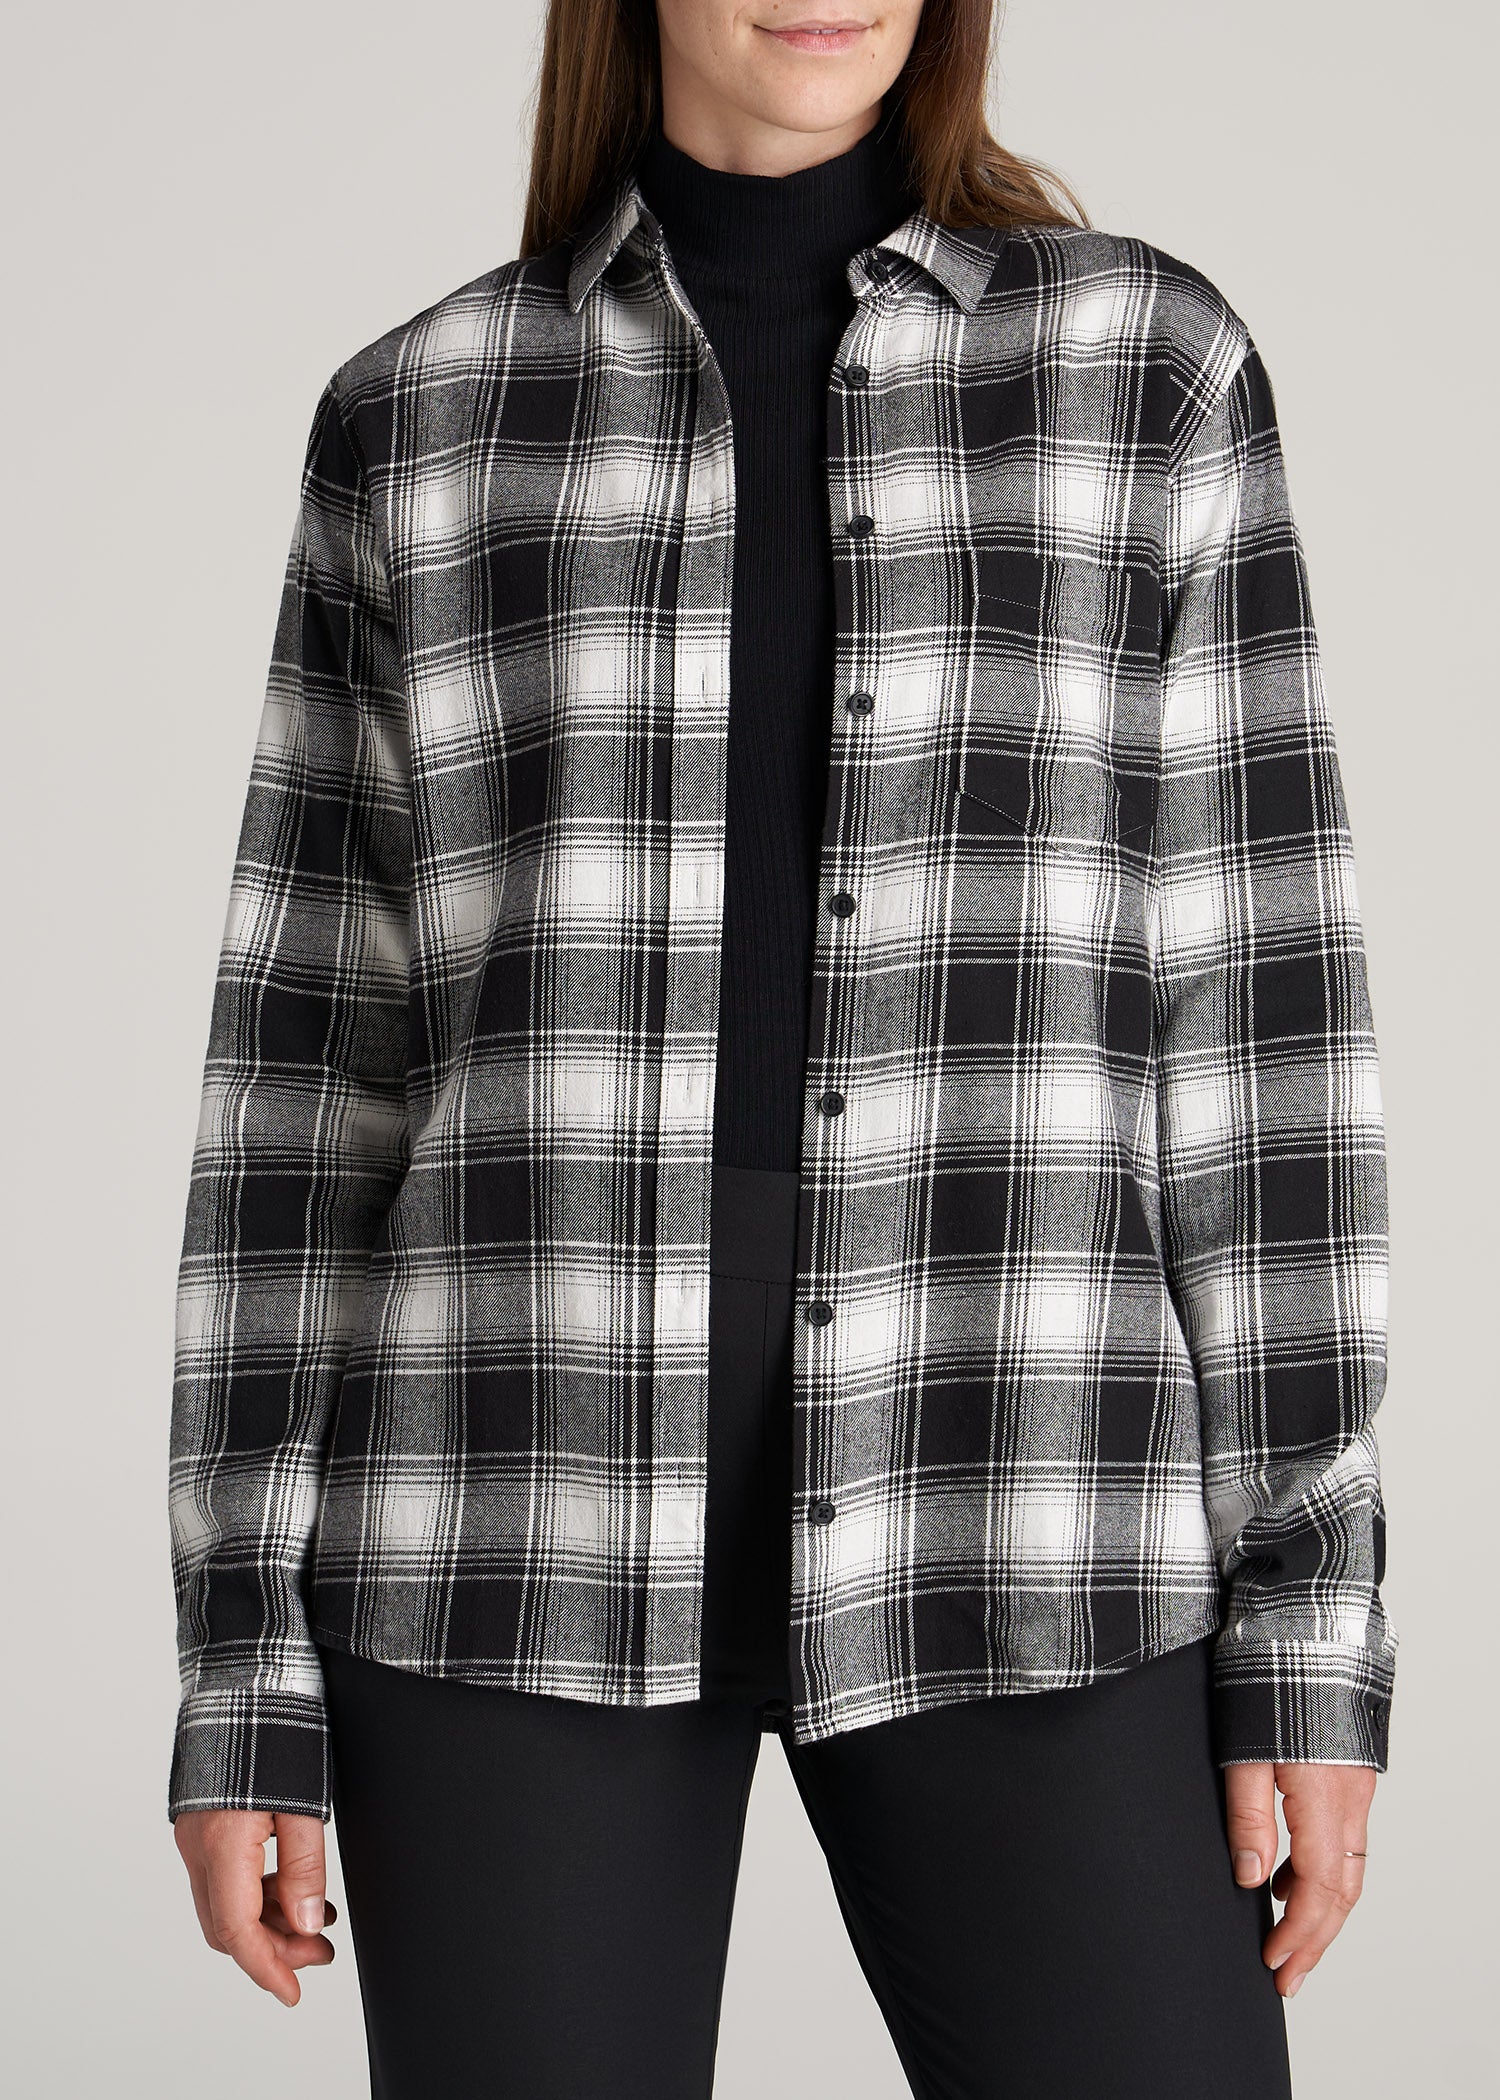 Flannel Button-Up Shirt for Tall Women in Black & White Plaid S / Extra Tall / Black & White Plaid